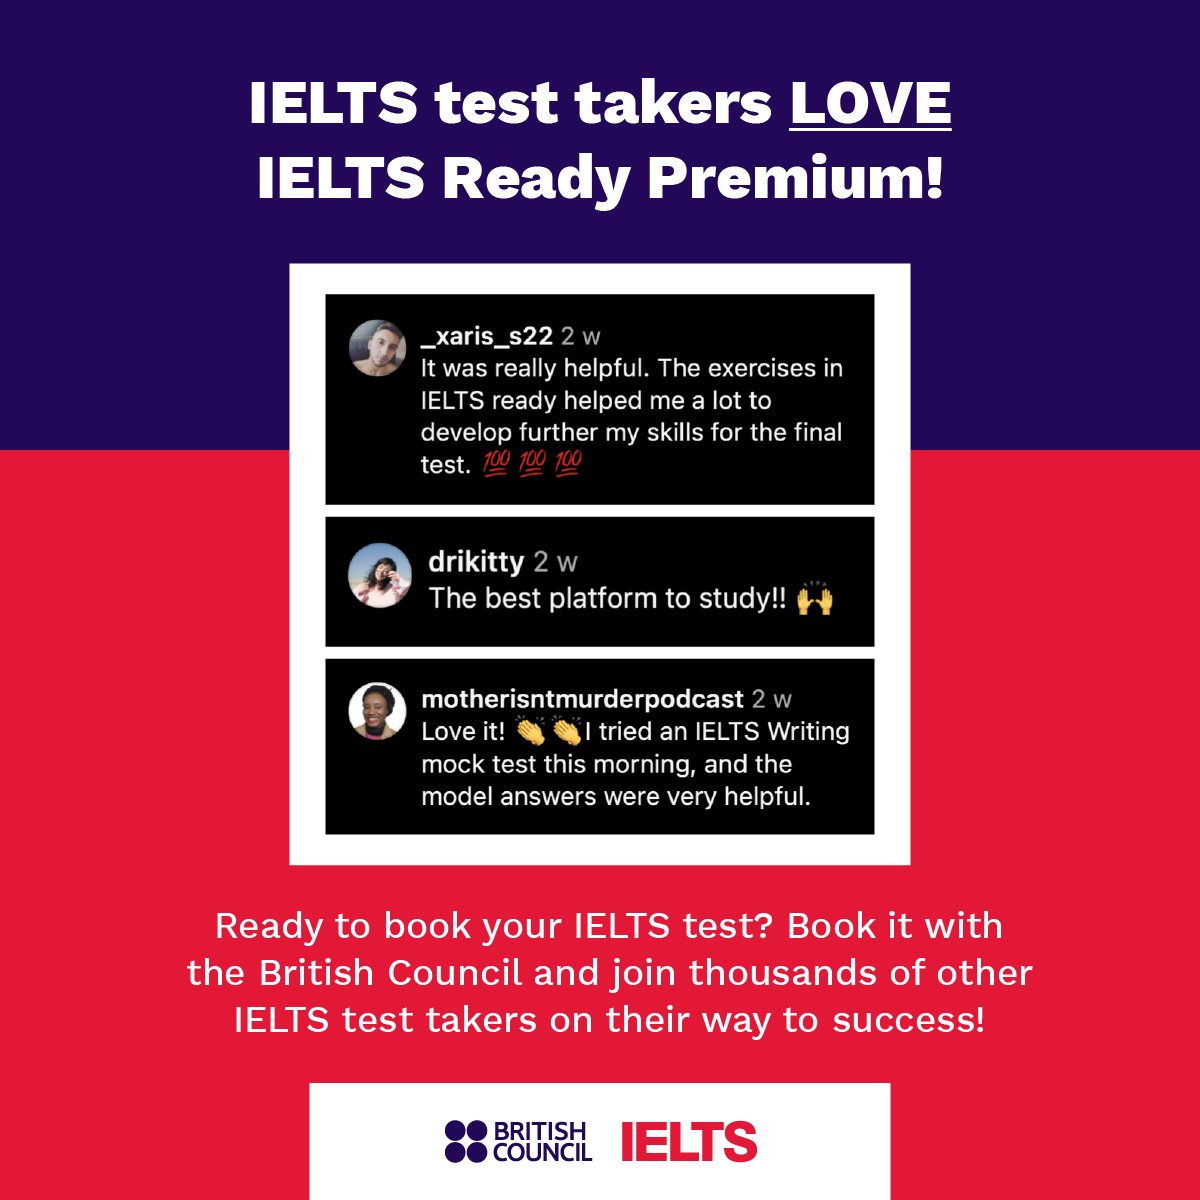 Ready to book your IELTS test? 💯 📝 Book it with the British Council and get access to over 80 hours of free IELTS preparation material with IELTS Ready Premium today! 🚀

More info: bit.ly/43uEnx1 

 #IELTSReadyPremium #IELTS #TakeIELTS #IELTSTest